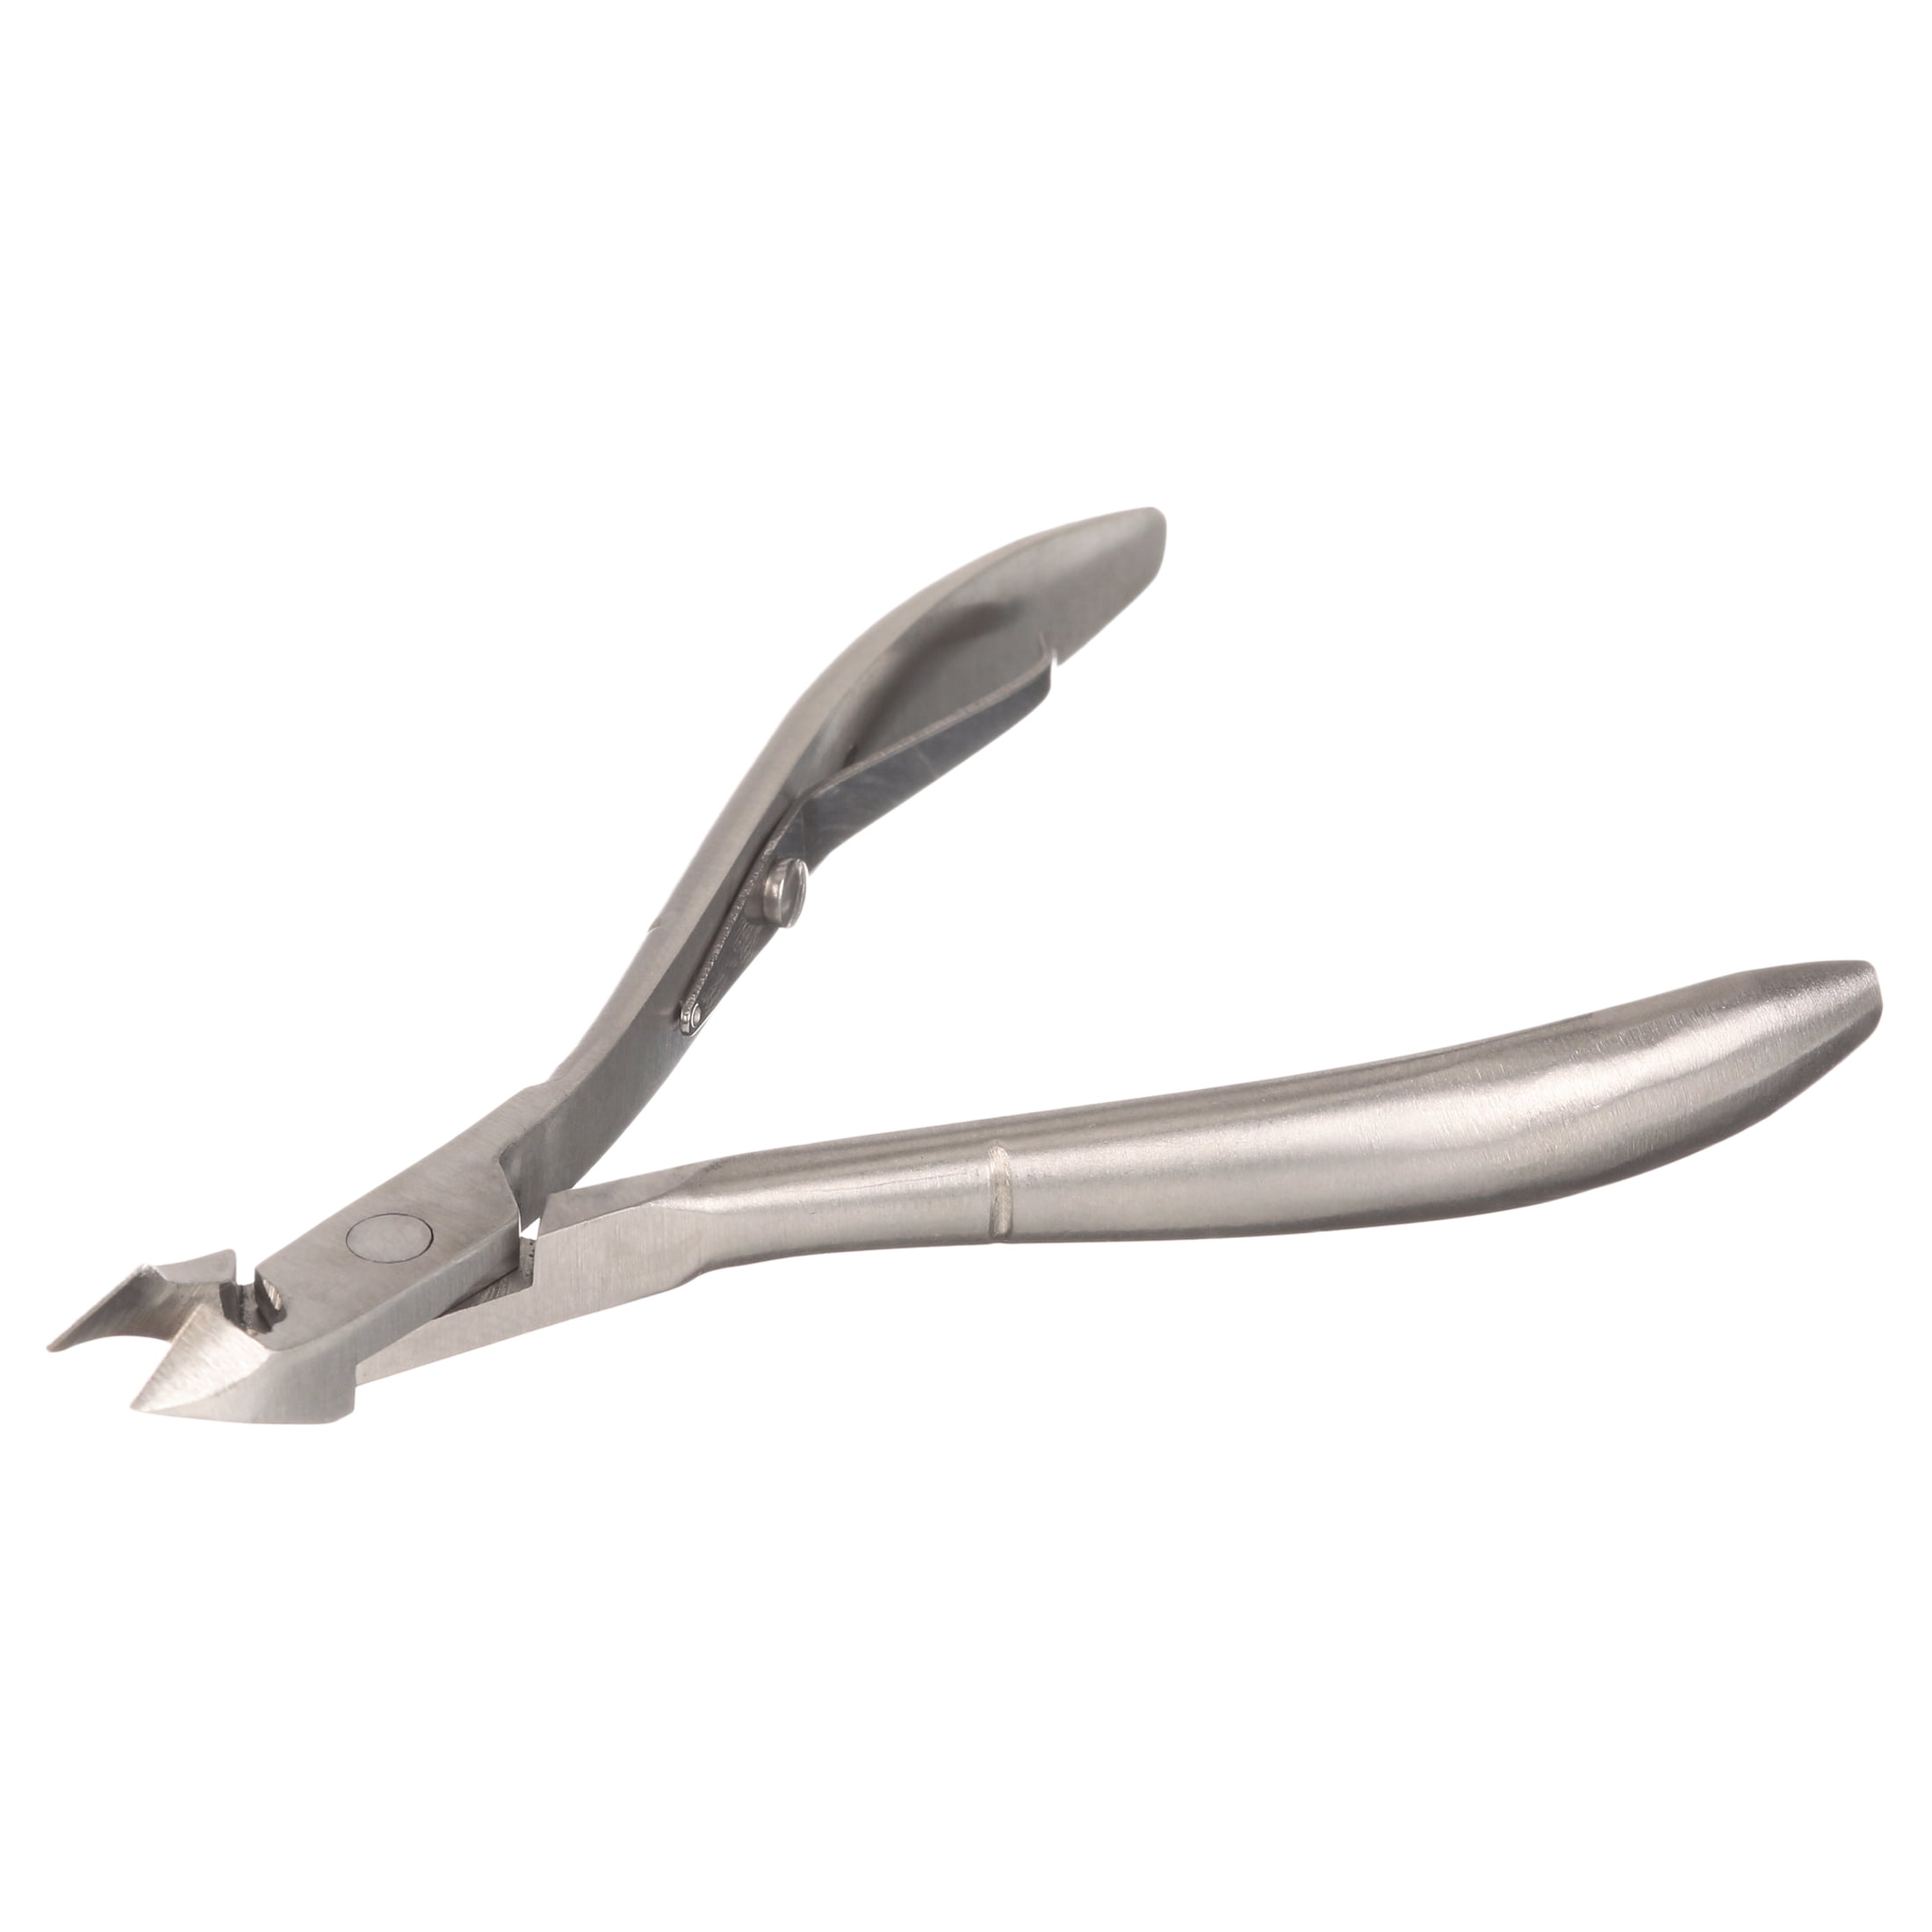 Amazon.com: Revlon Beauty Tools Control Grip Jaw Cuticle Nipper-1/4 inches  : Beauty & Personal Care